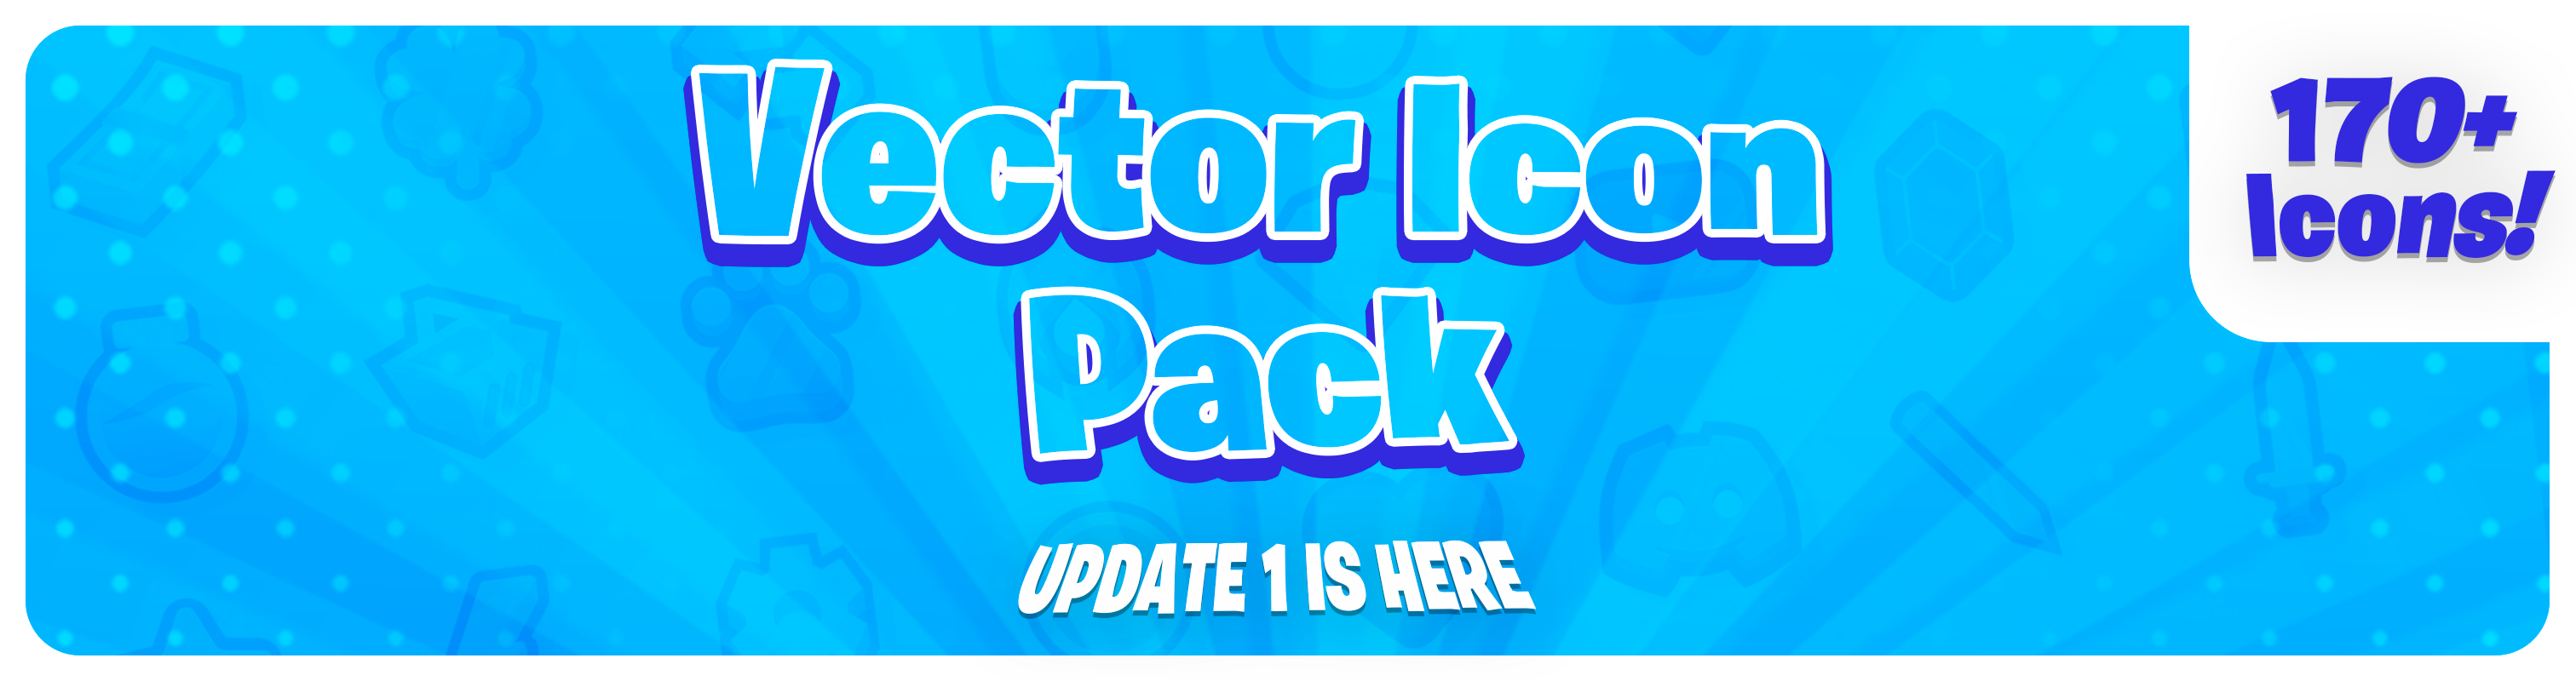 Vector Icon Pack - UPDATED!